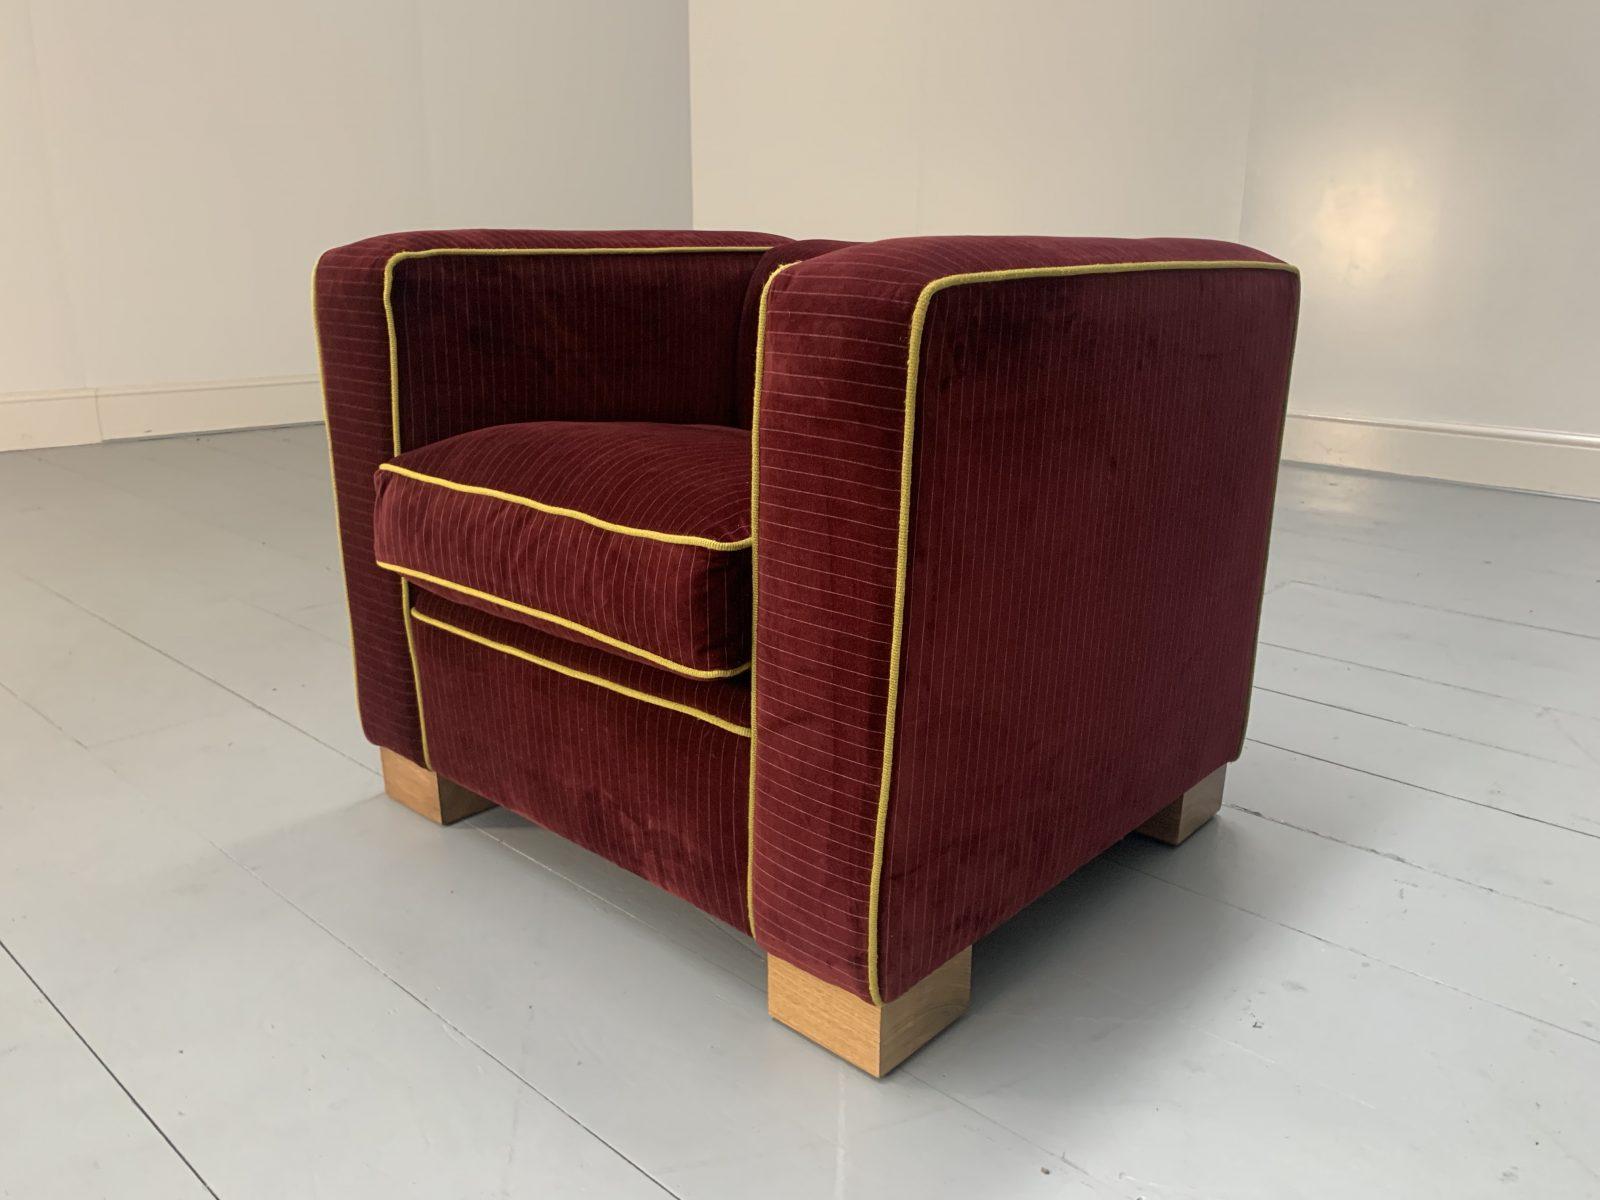 This is a superb David Linley “Chase” Armchair, dressed in a luxurious, top-grade Italian-velvet pinstripe-fabric in Deep Purple with Lime Green contrast-piping.

In a world of temporary pleasures, Linley create beautiful furniture built to last a